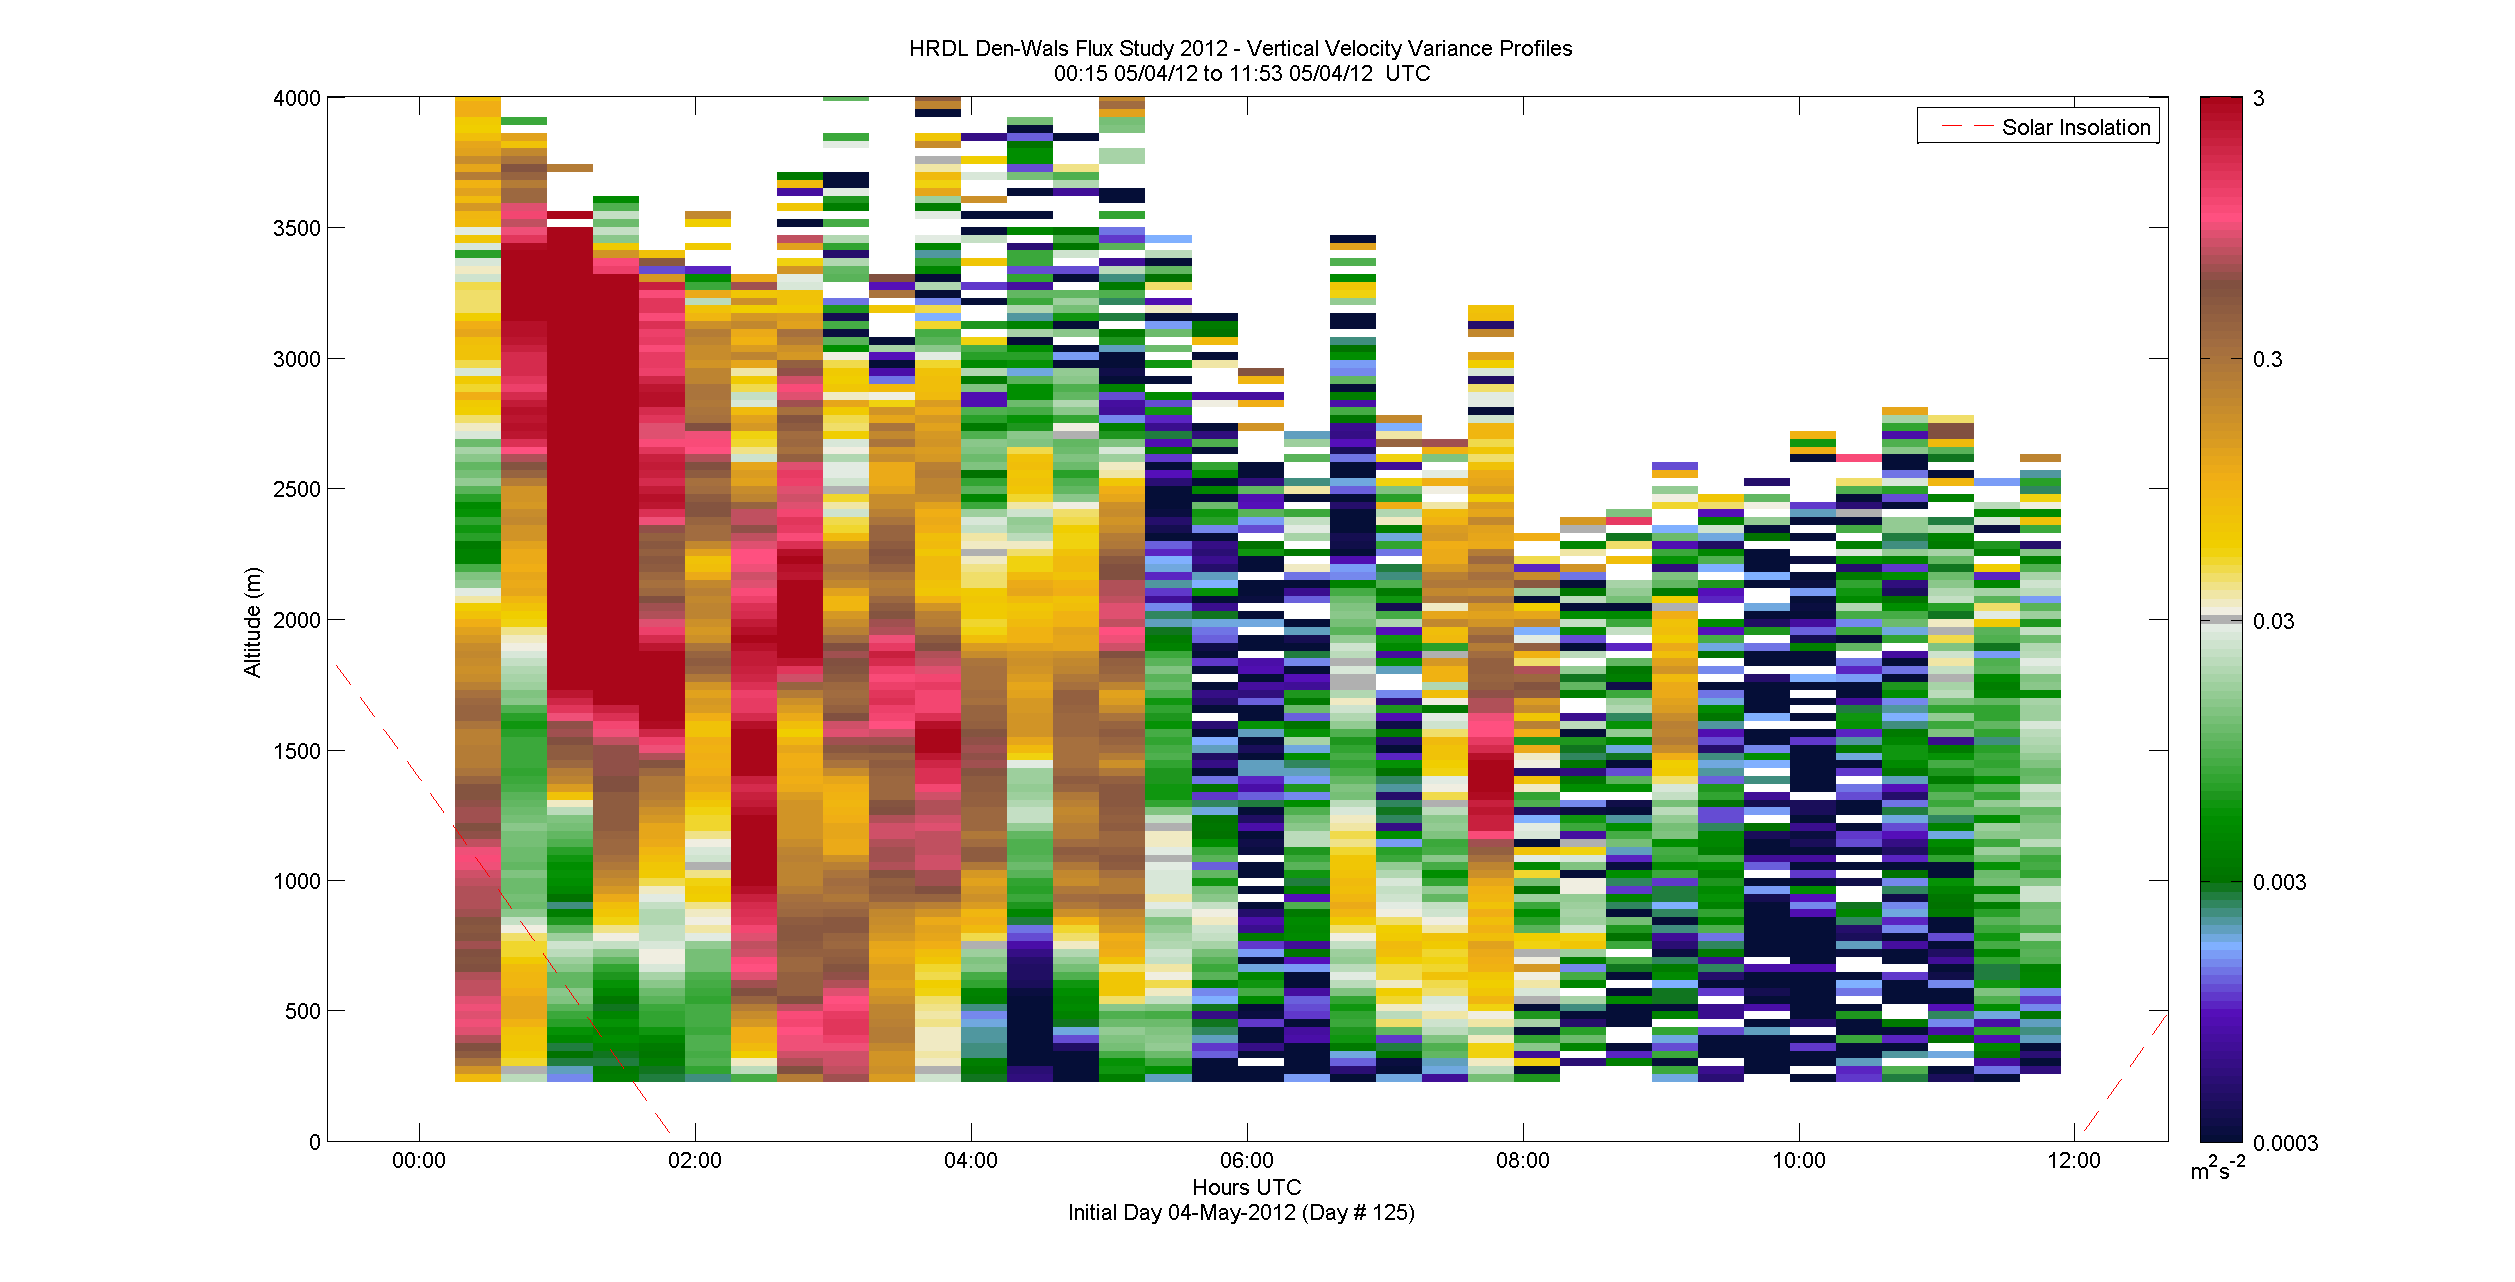 HRDL vertical variance profile - May 4 am